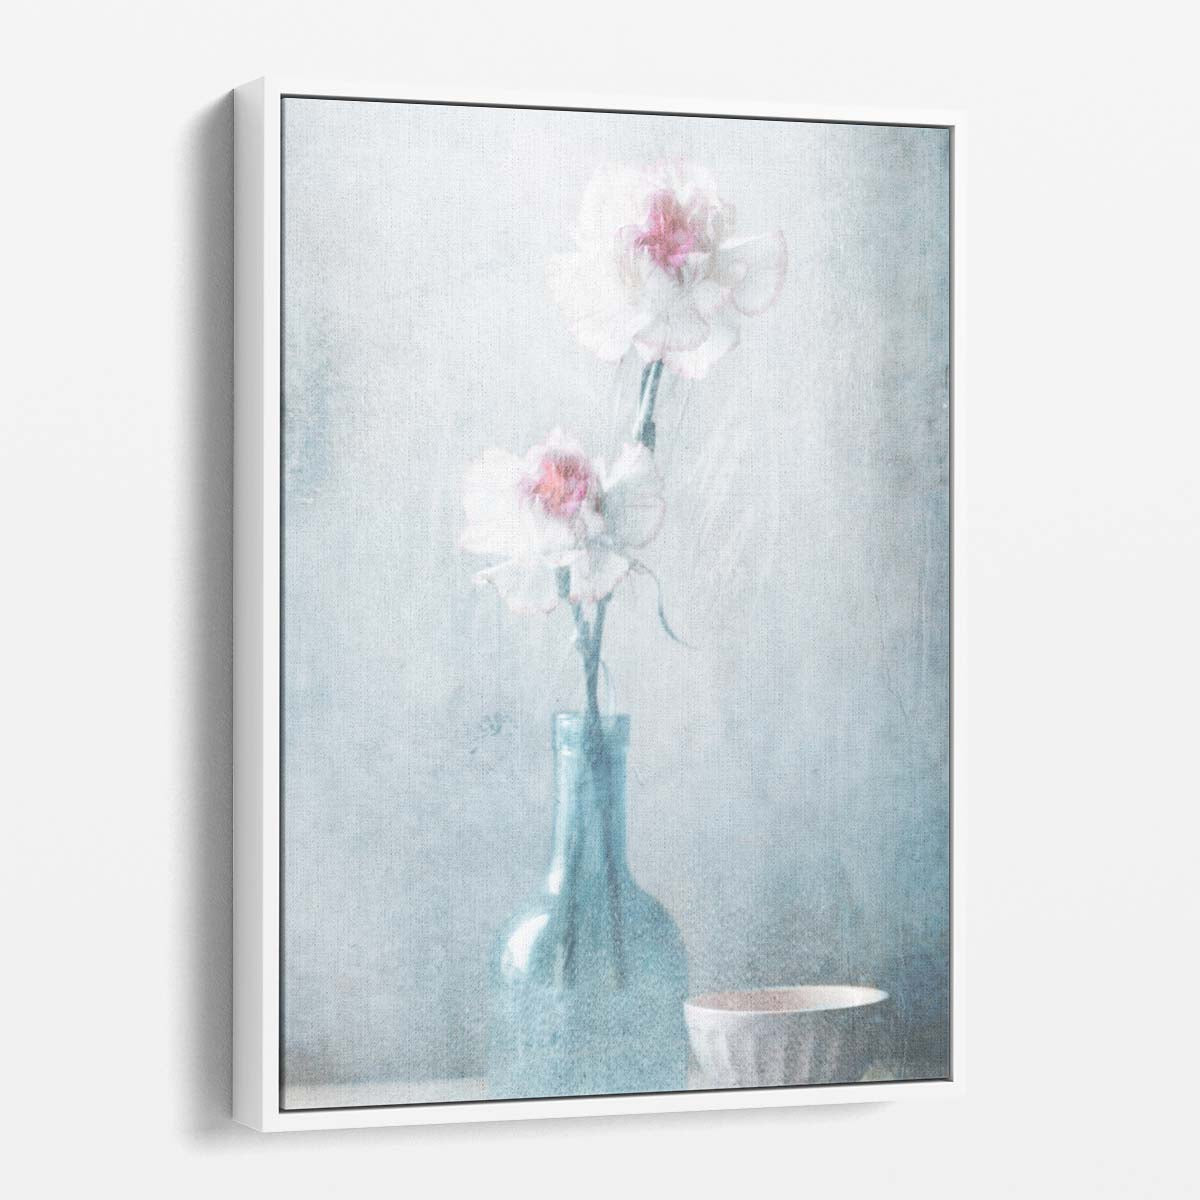 Painterly Floral Still Life Photography Grainy Blue Vase with Pink Flowers by Luxuriance Designs, made in USA